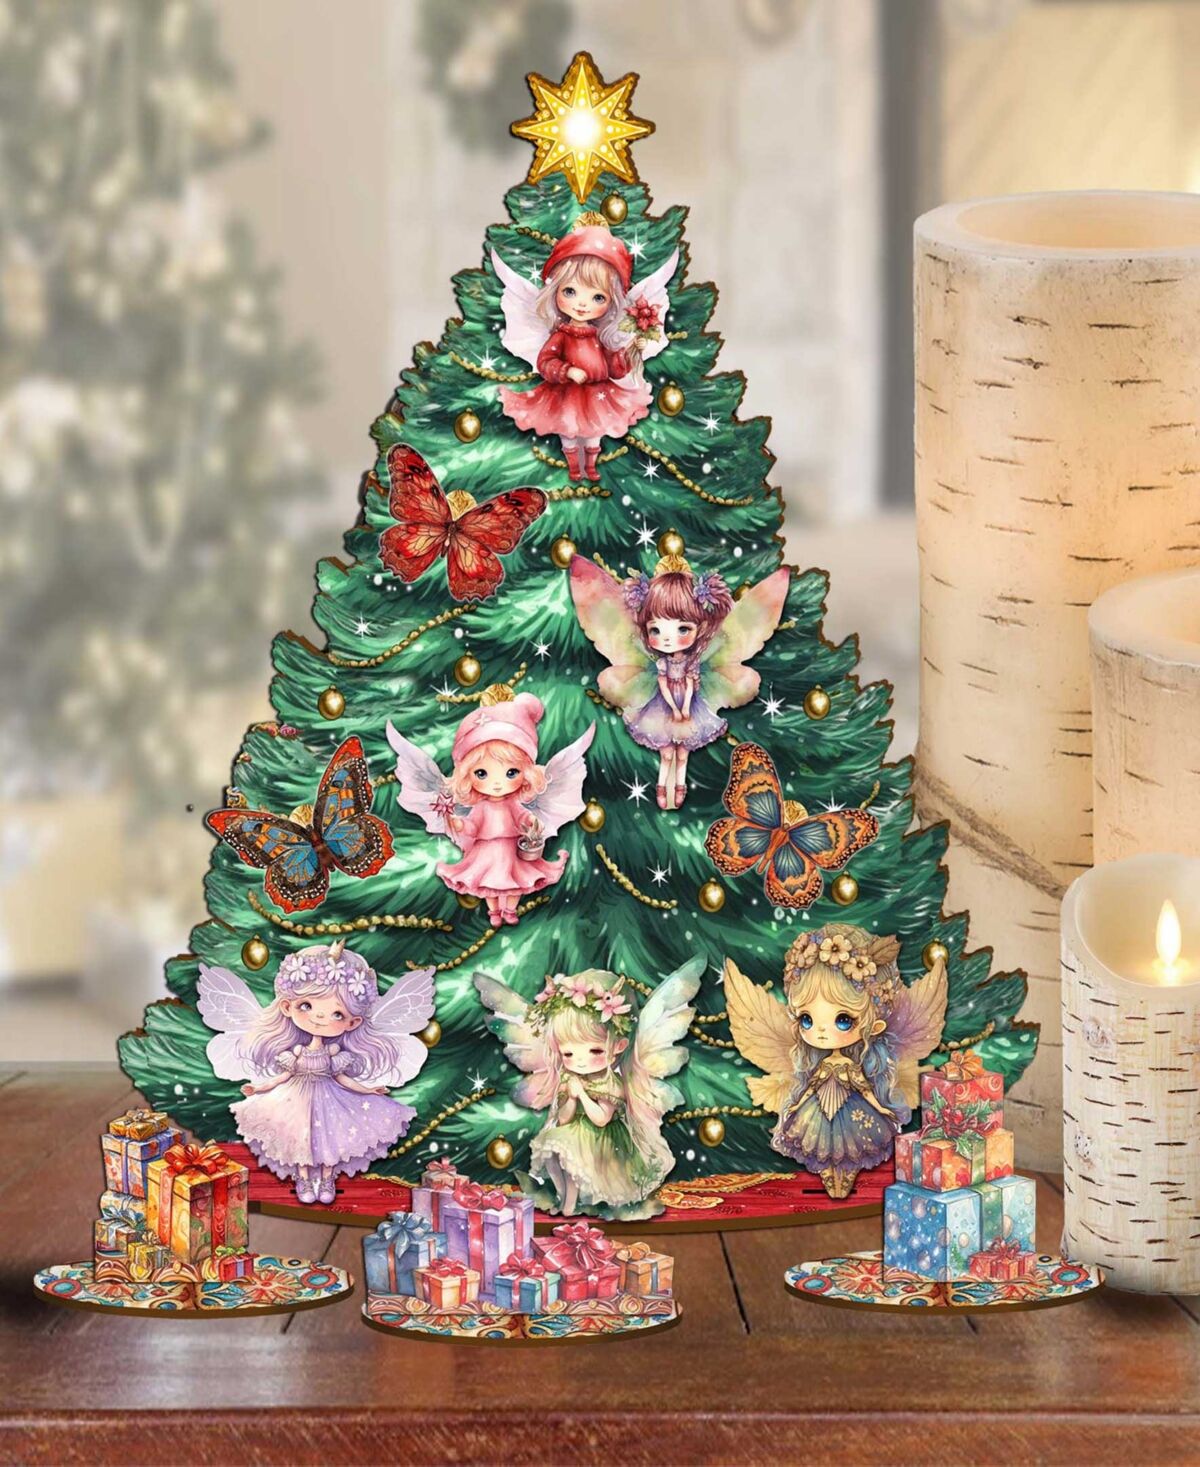 Designocracy Fairies and Butterflies-Themed Collectible Tabletop Christmas Tree by G.DeBrekht - Multi Color